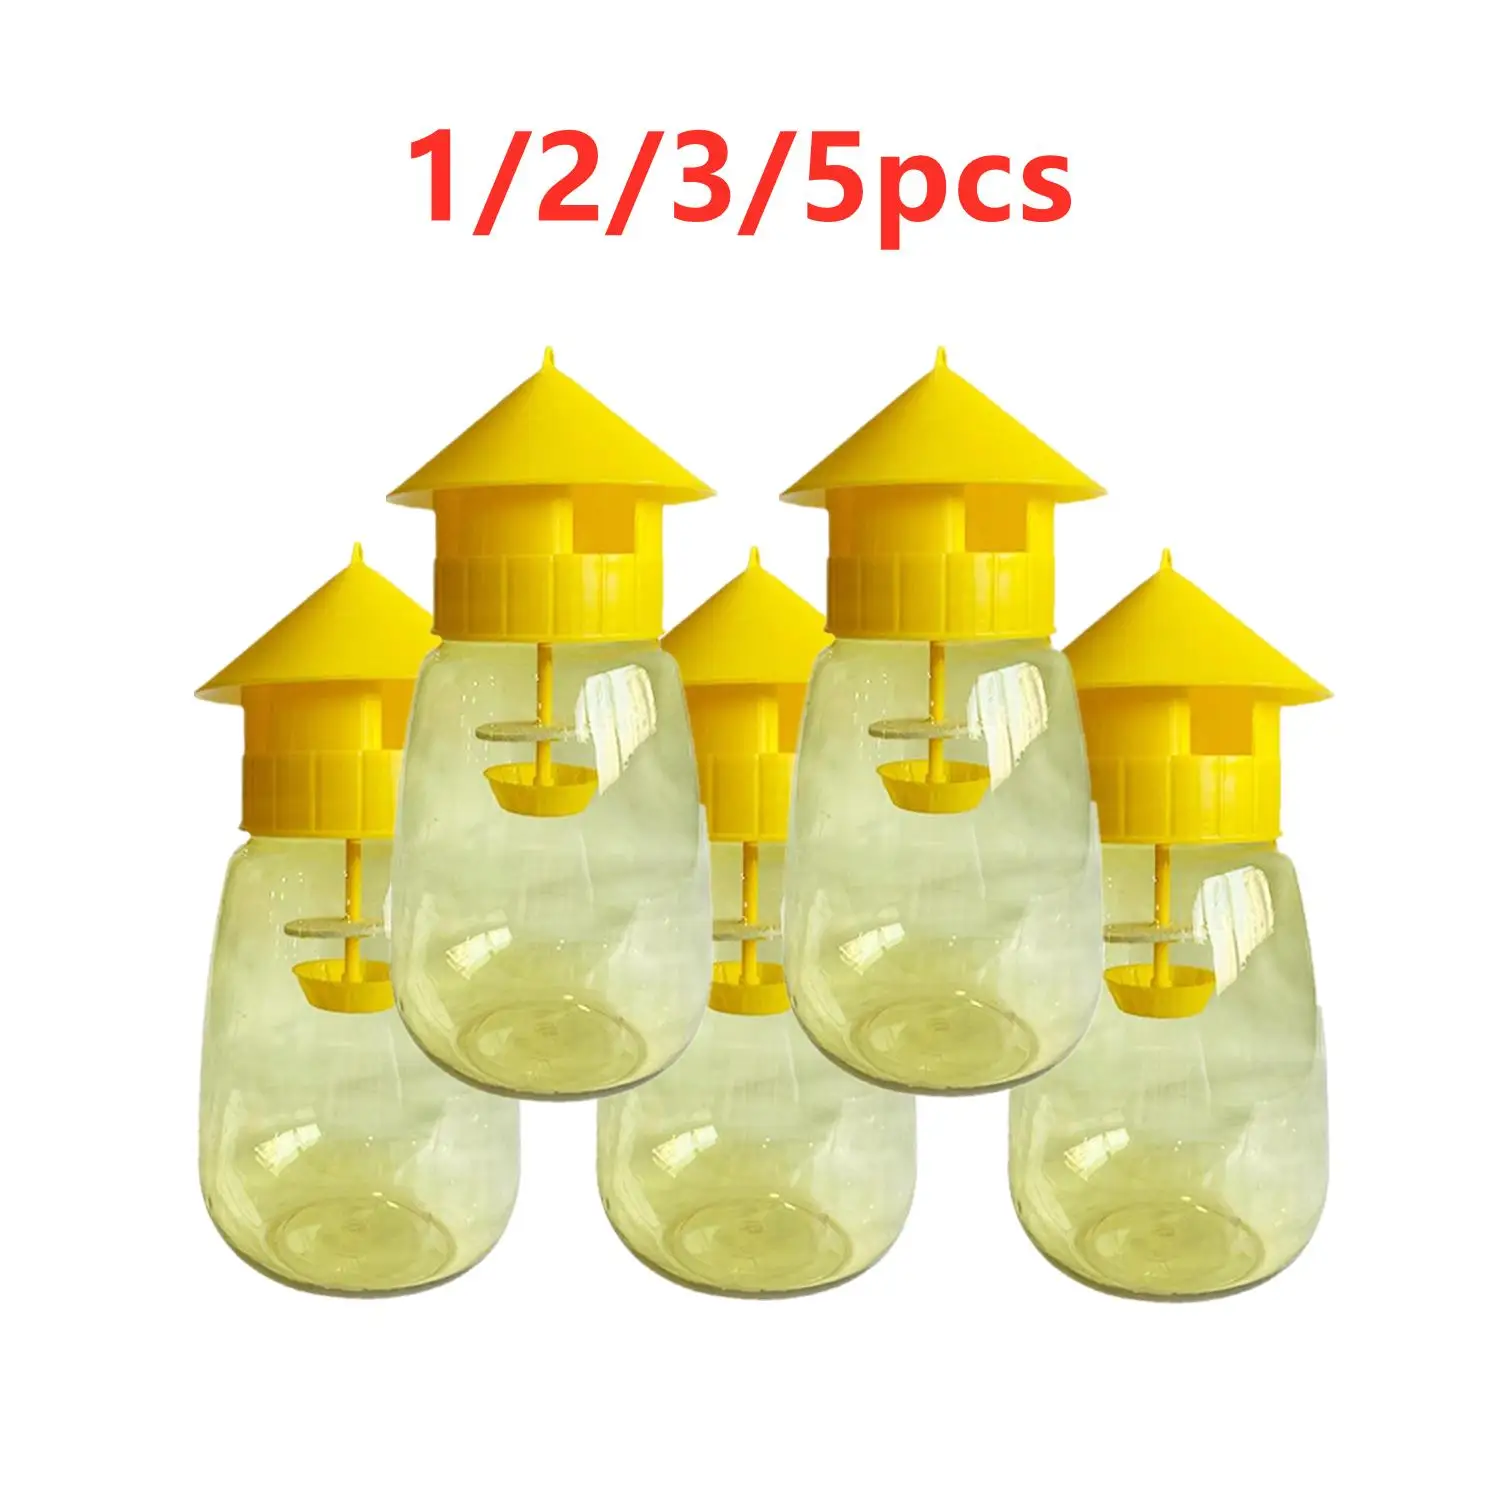 

LOT Fruit Fly Trap Killer Yellow Plastic Drosophila Trap Fly Orchard Anti Fruit Catcher Pest Fly Trap Control Insect Products